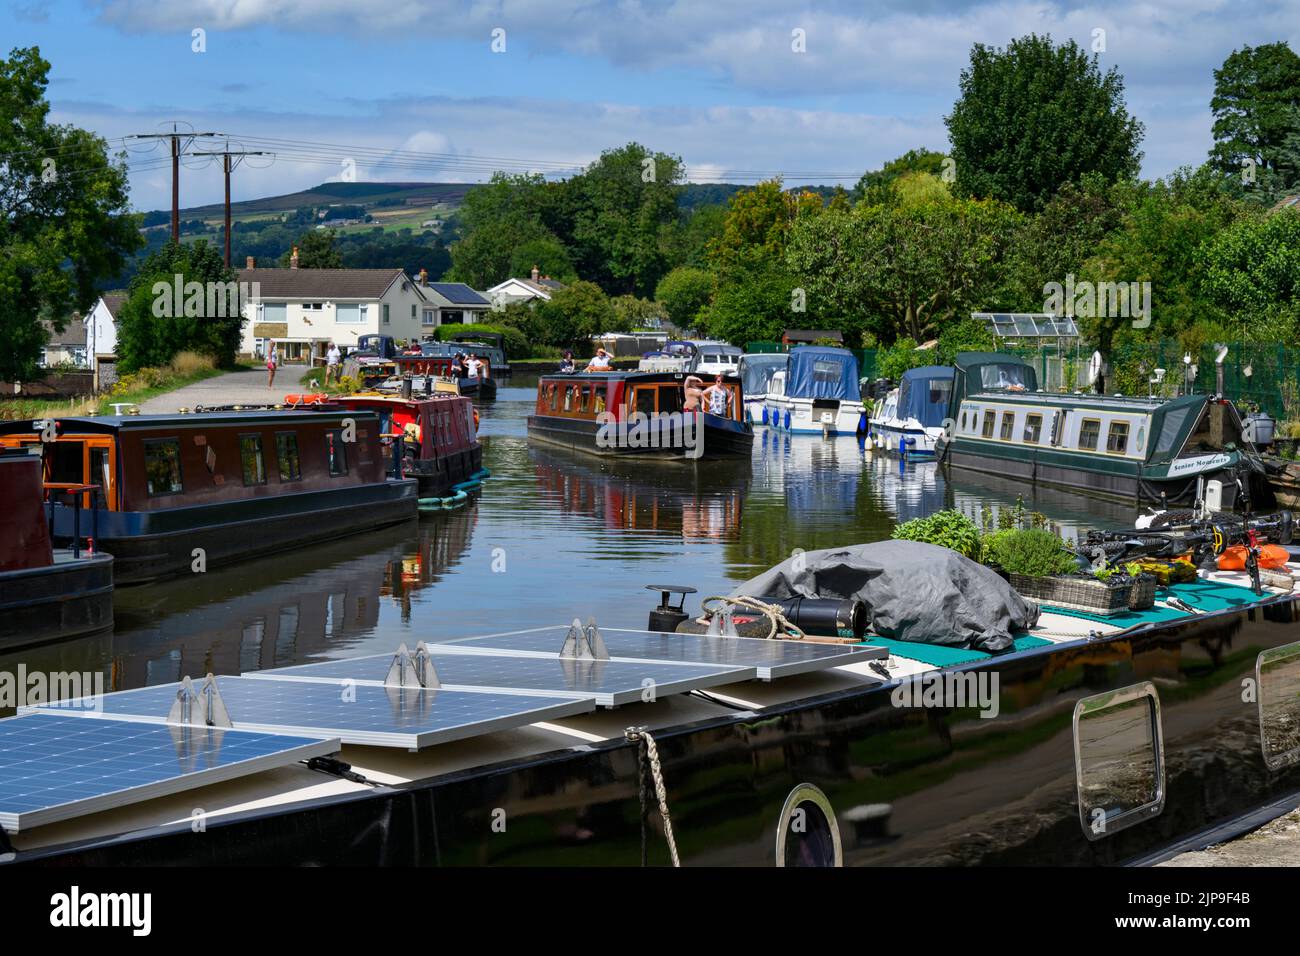 Barges at busy moorings, self-drive hire boat traveling, scenic sunny stretch of Leeds Liverpool Canal & towpath - Bingley, West Yorkshire England UK. Stock Photo